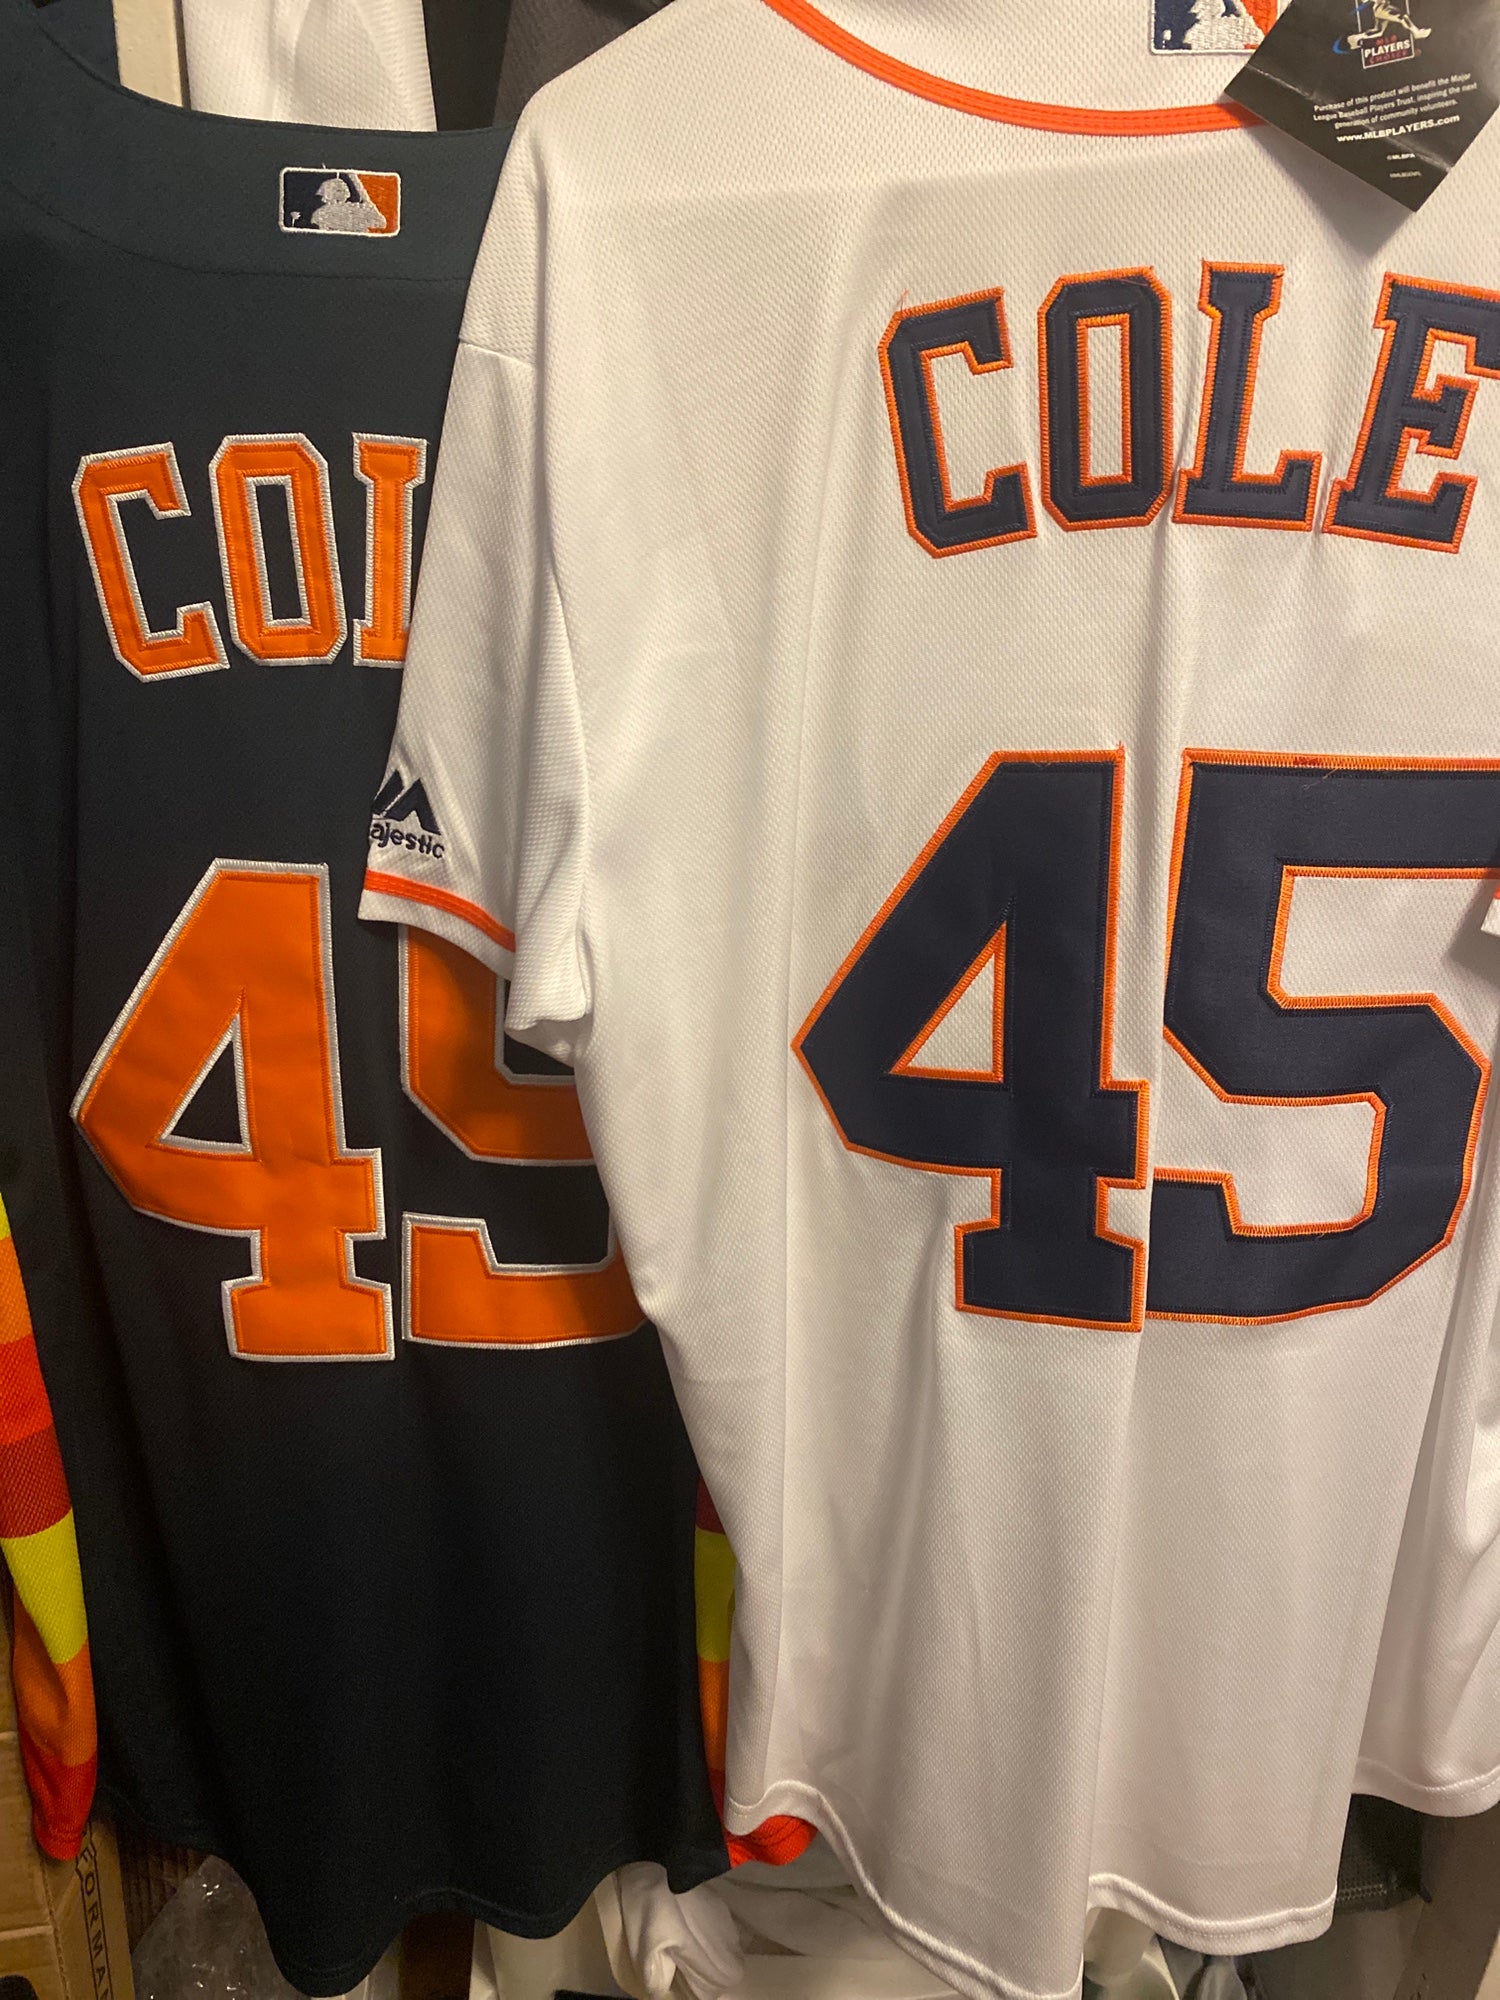 Men's Majestic Gerrit Cole White Houston Astros Home Cool Base Player Jersey